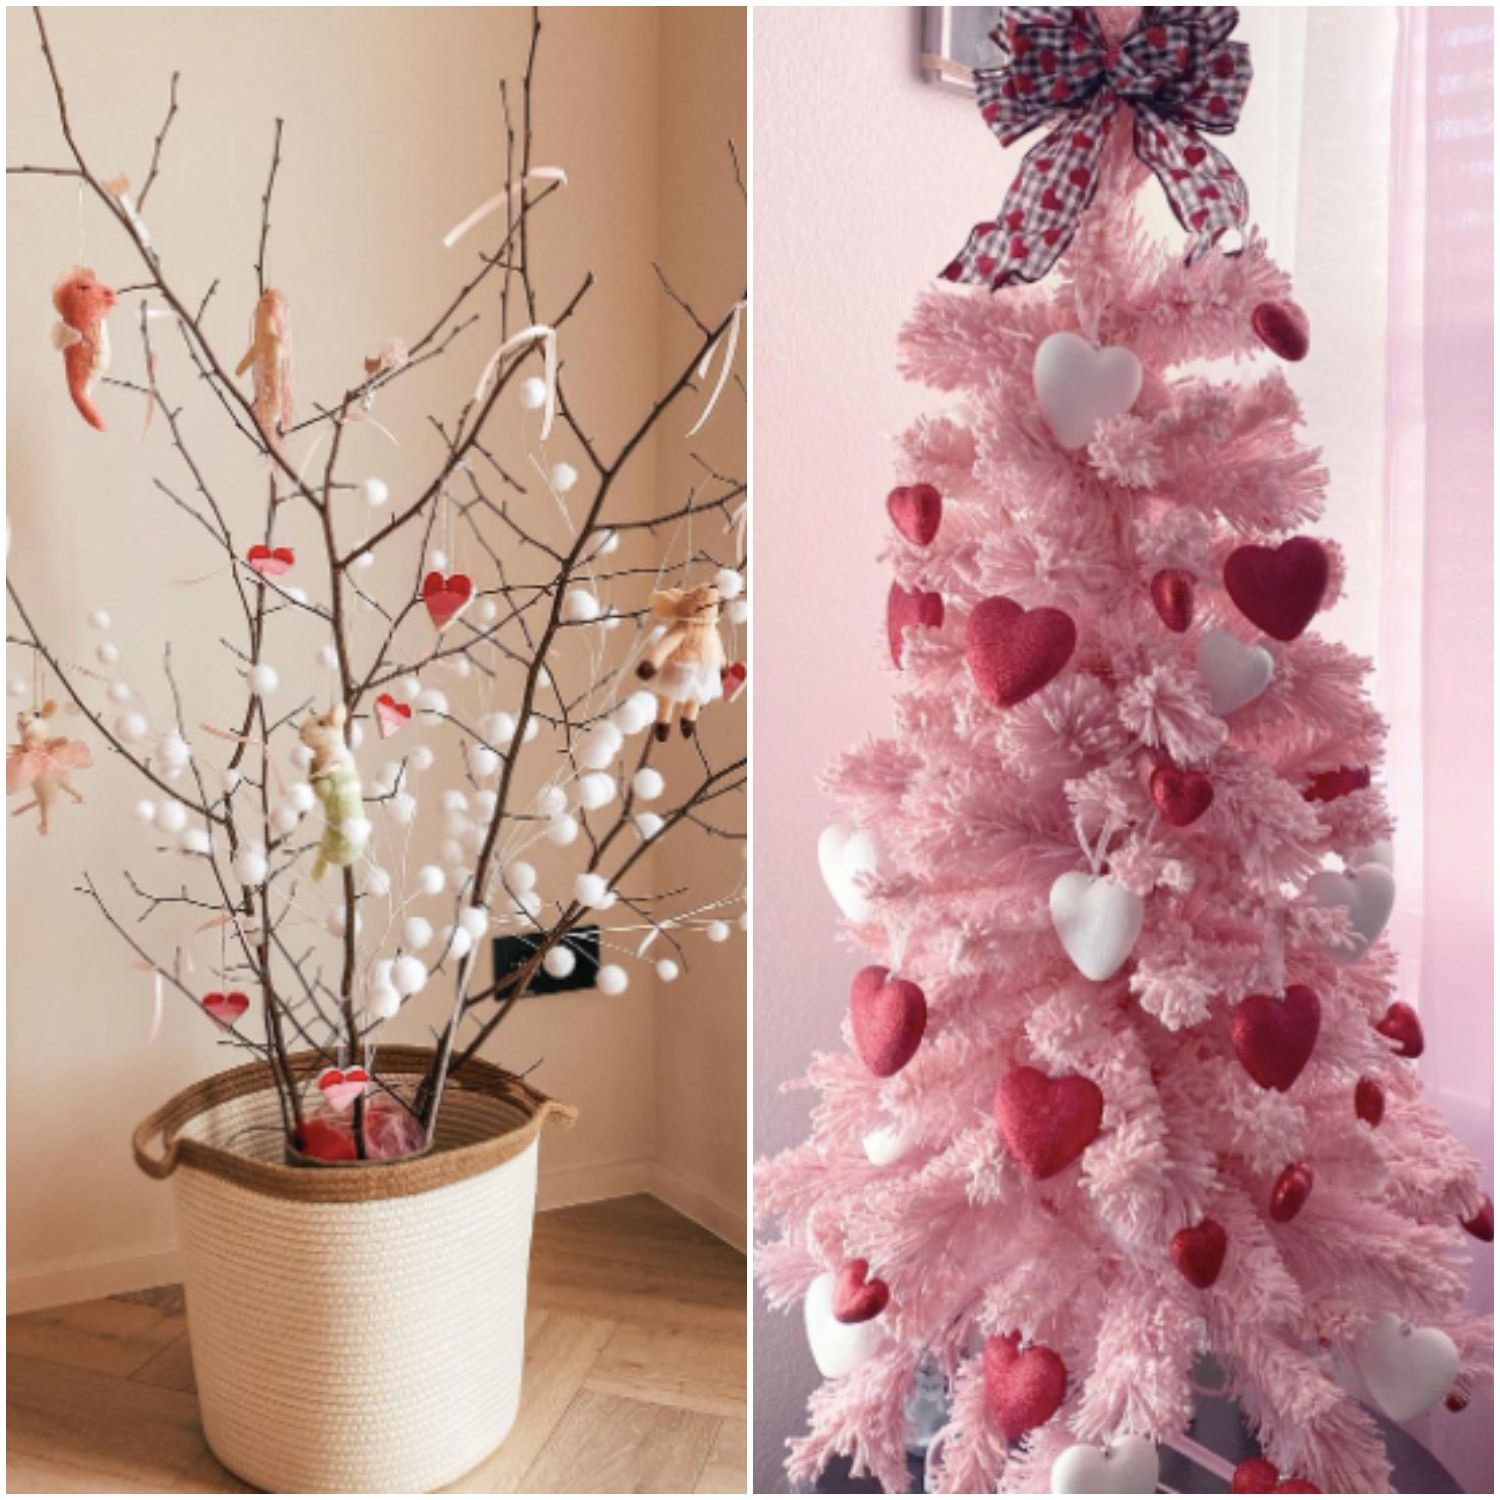 Valentine's Tree: Trend Sees Christmas Trees For Valentine's Day